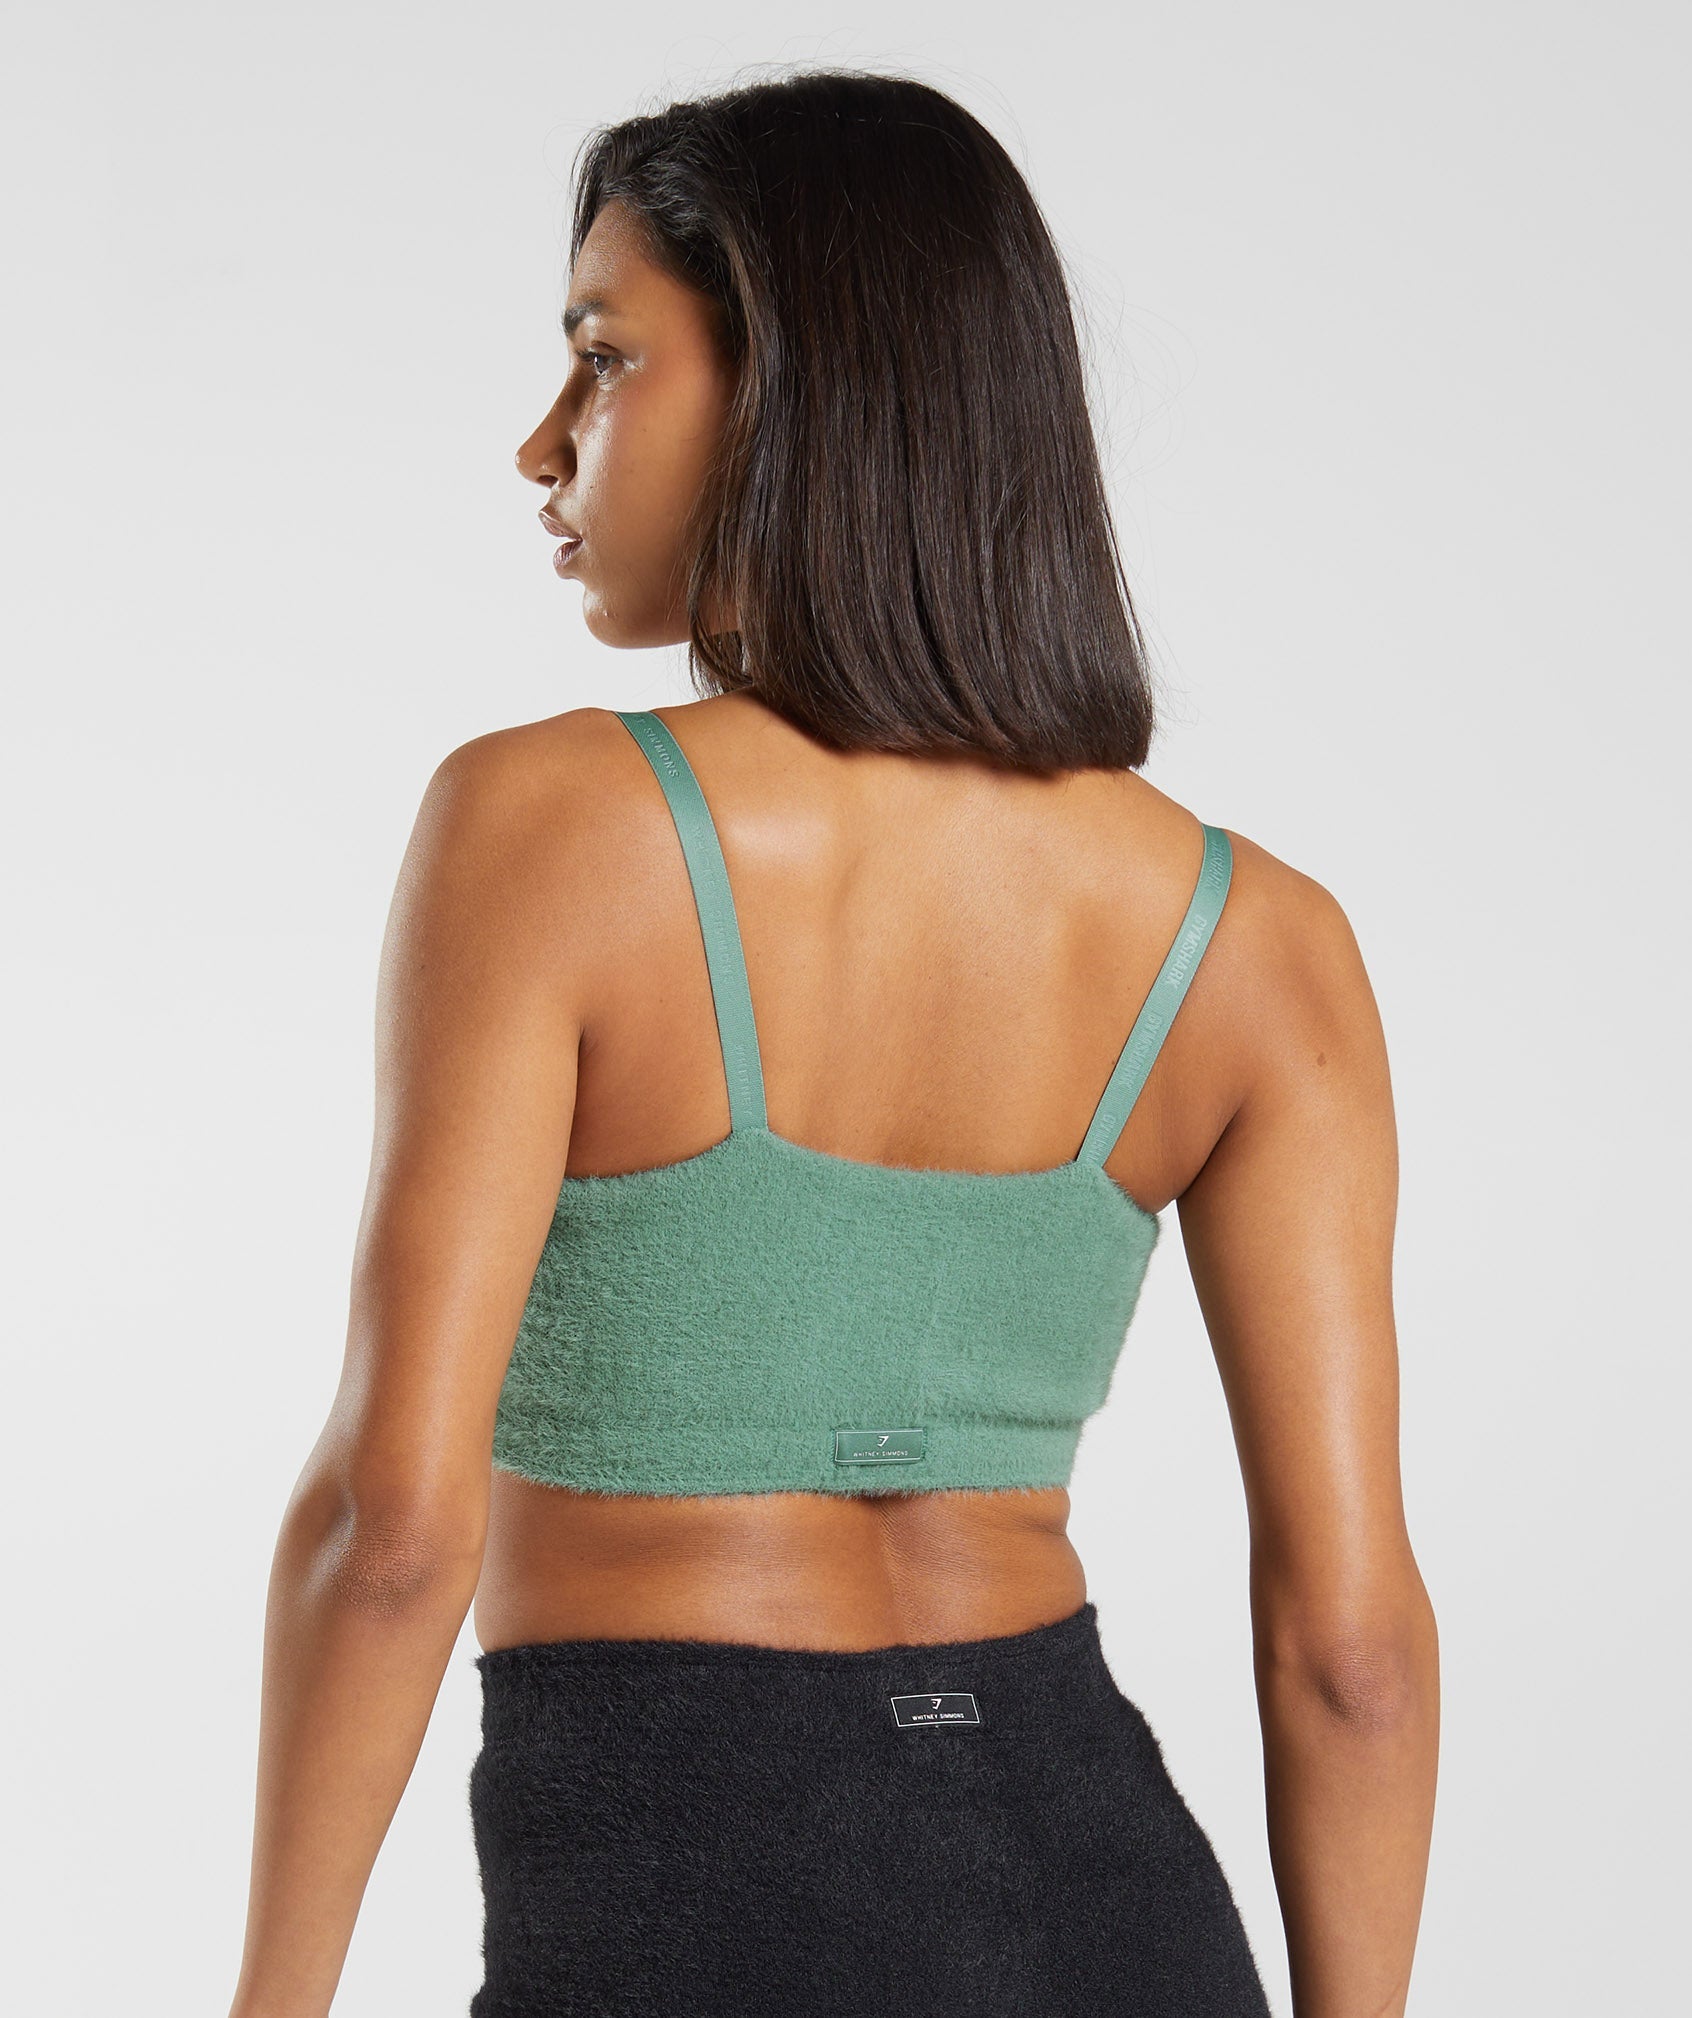 Gymshark X Whitney Simmons Sports Bra Black Small Keyhole Crop Top Nylon  for sale online